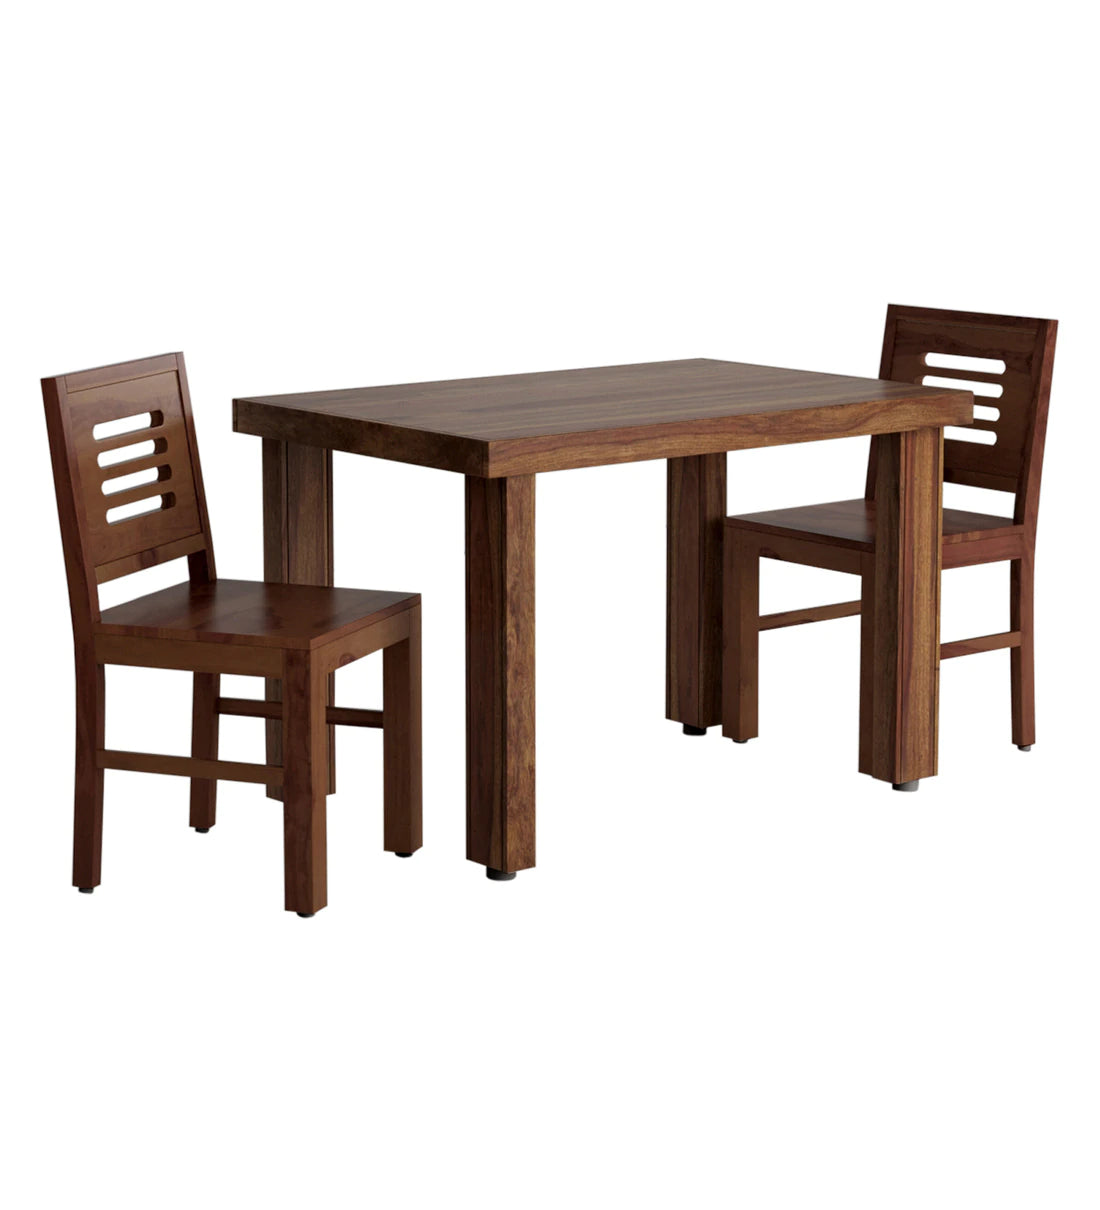 Acro Solid Wood 2 Seater Dining Table Set for Home & Kitchen - Rajwada Furnish